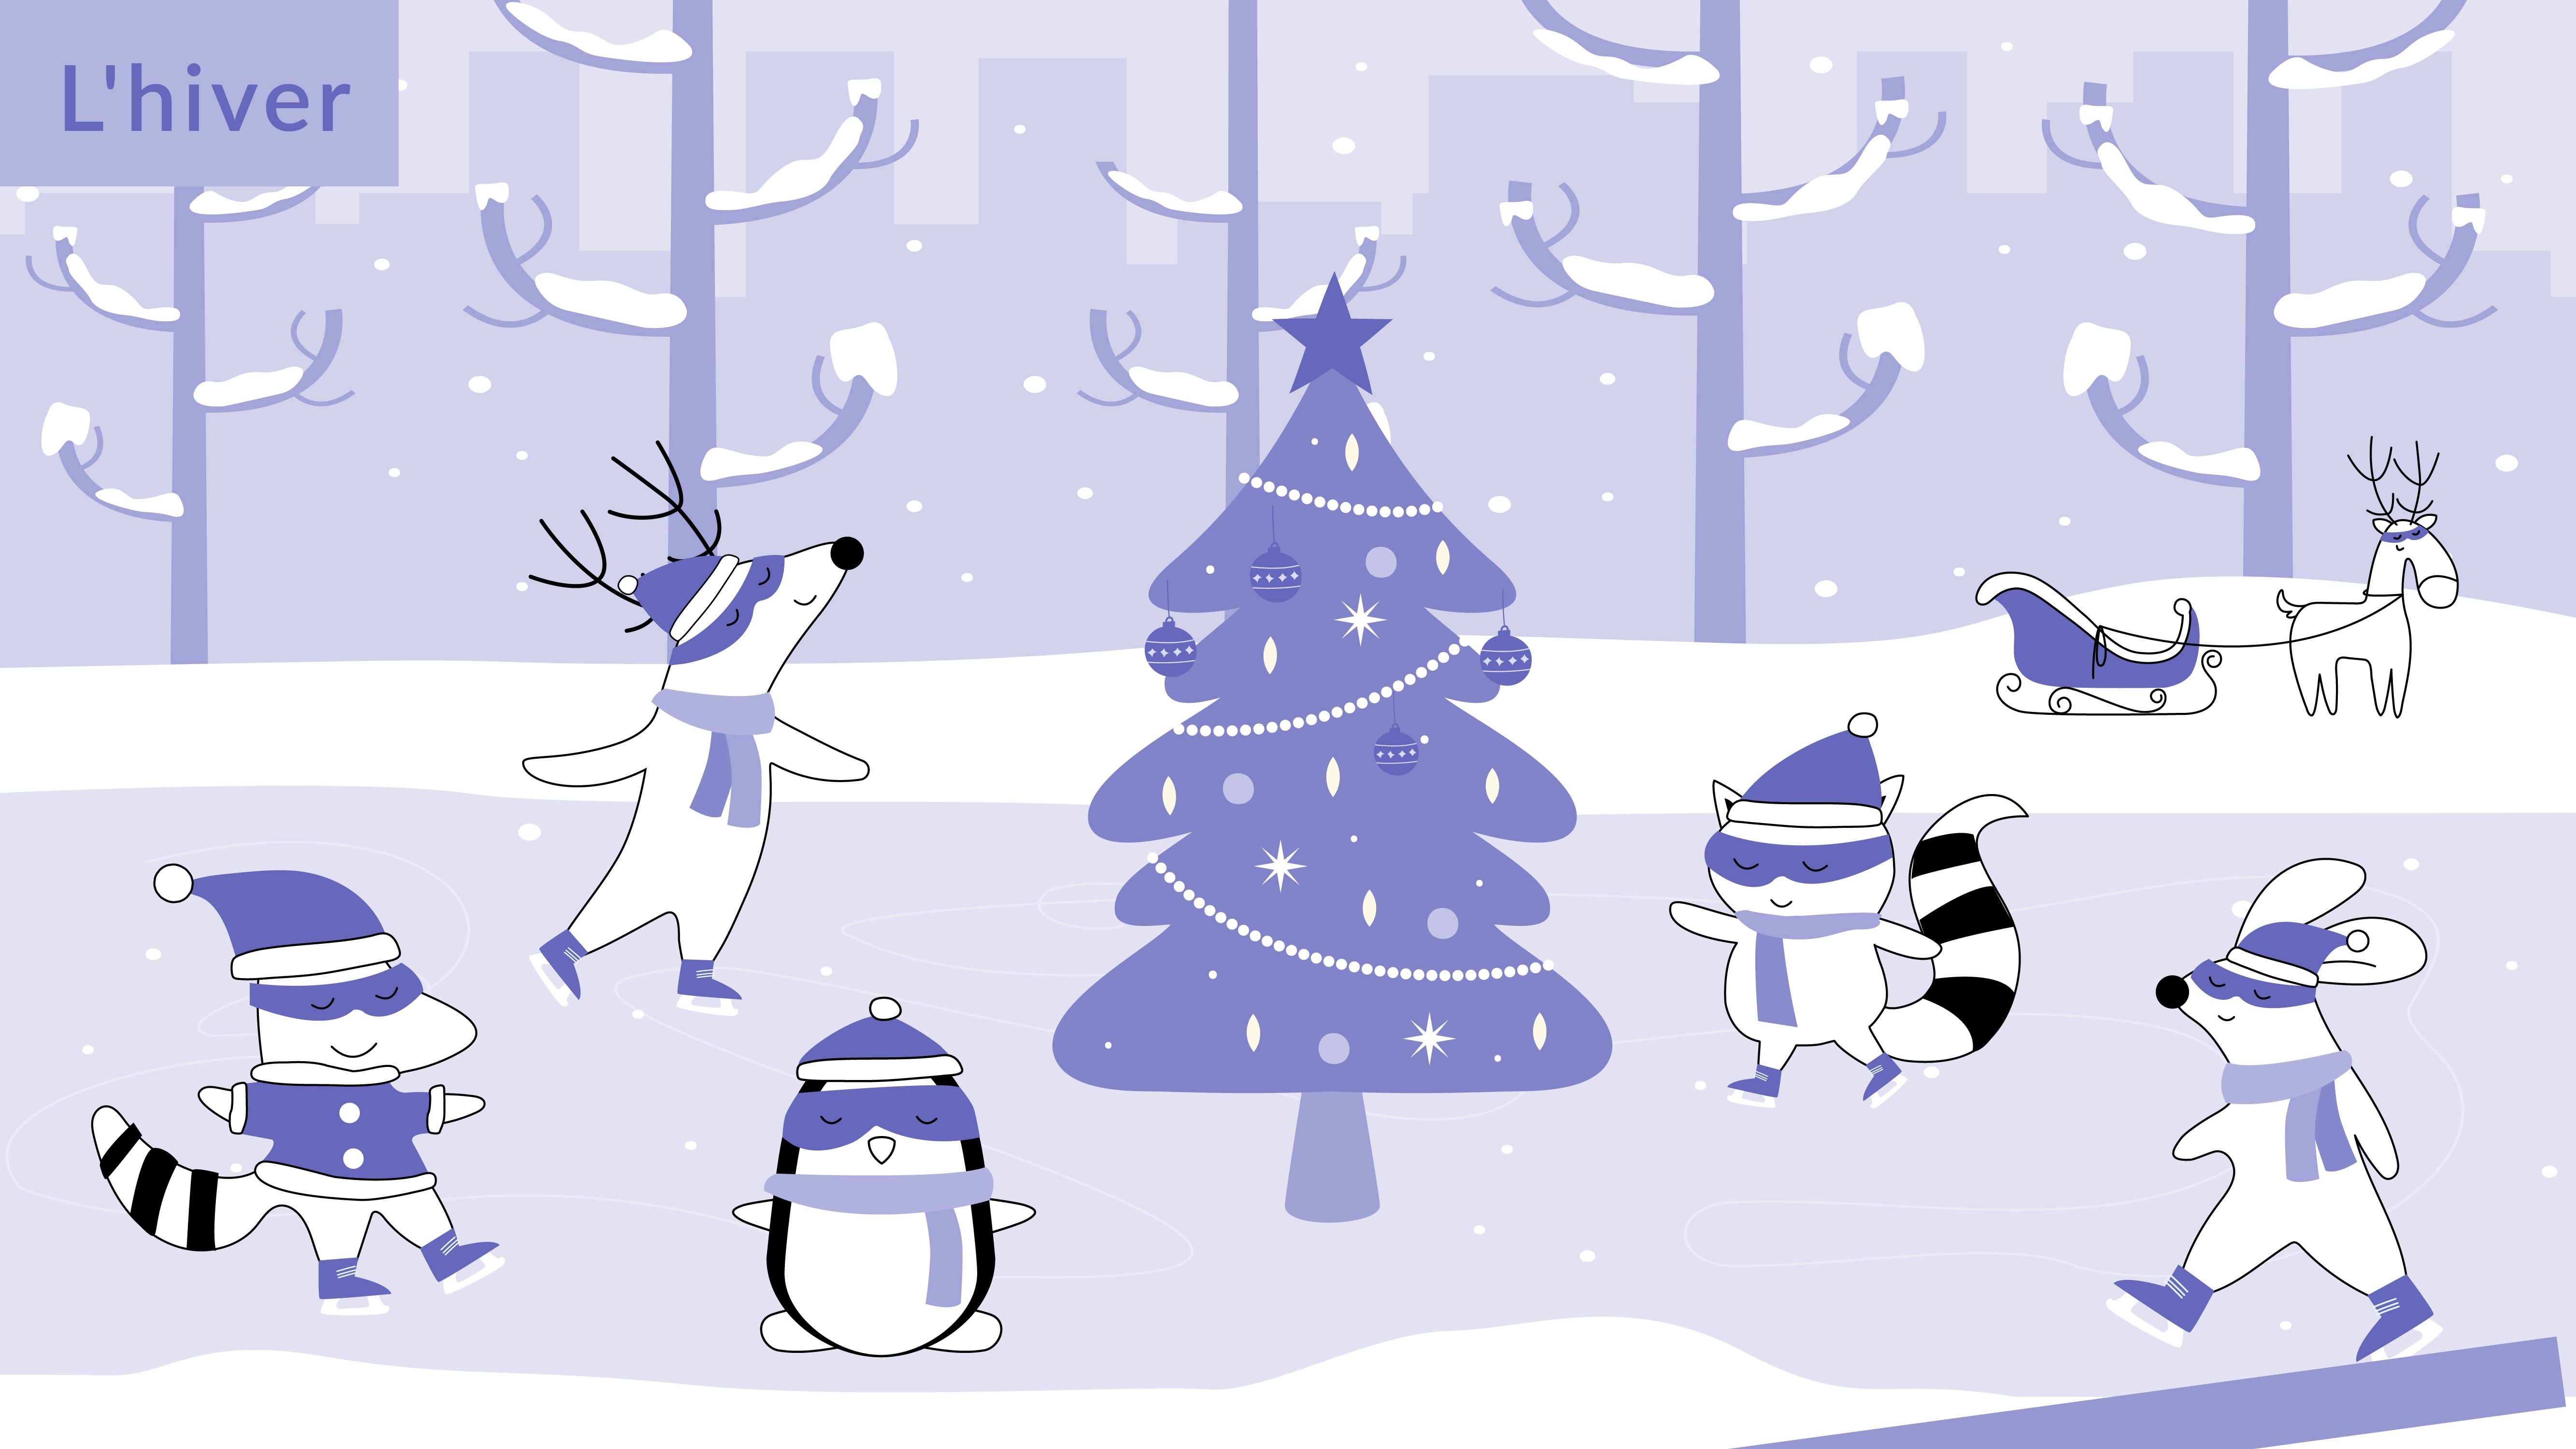 Soren, Pocky, Iggy, and Benji are ice skating at the park, decorated with Christmas lights and a Christmas tree. There is “L'hiver” written in the high right corner.